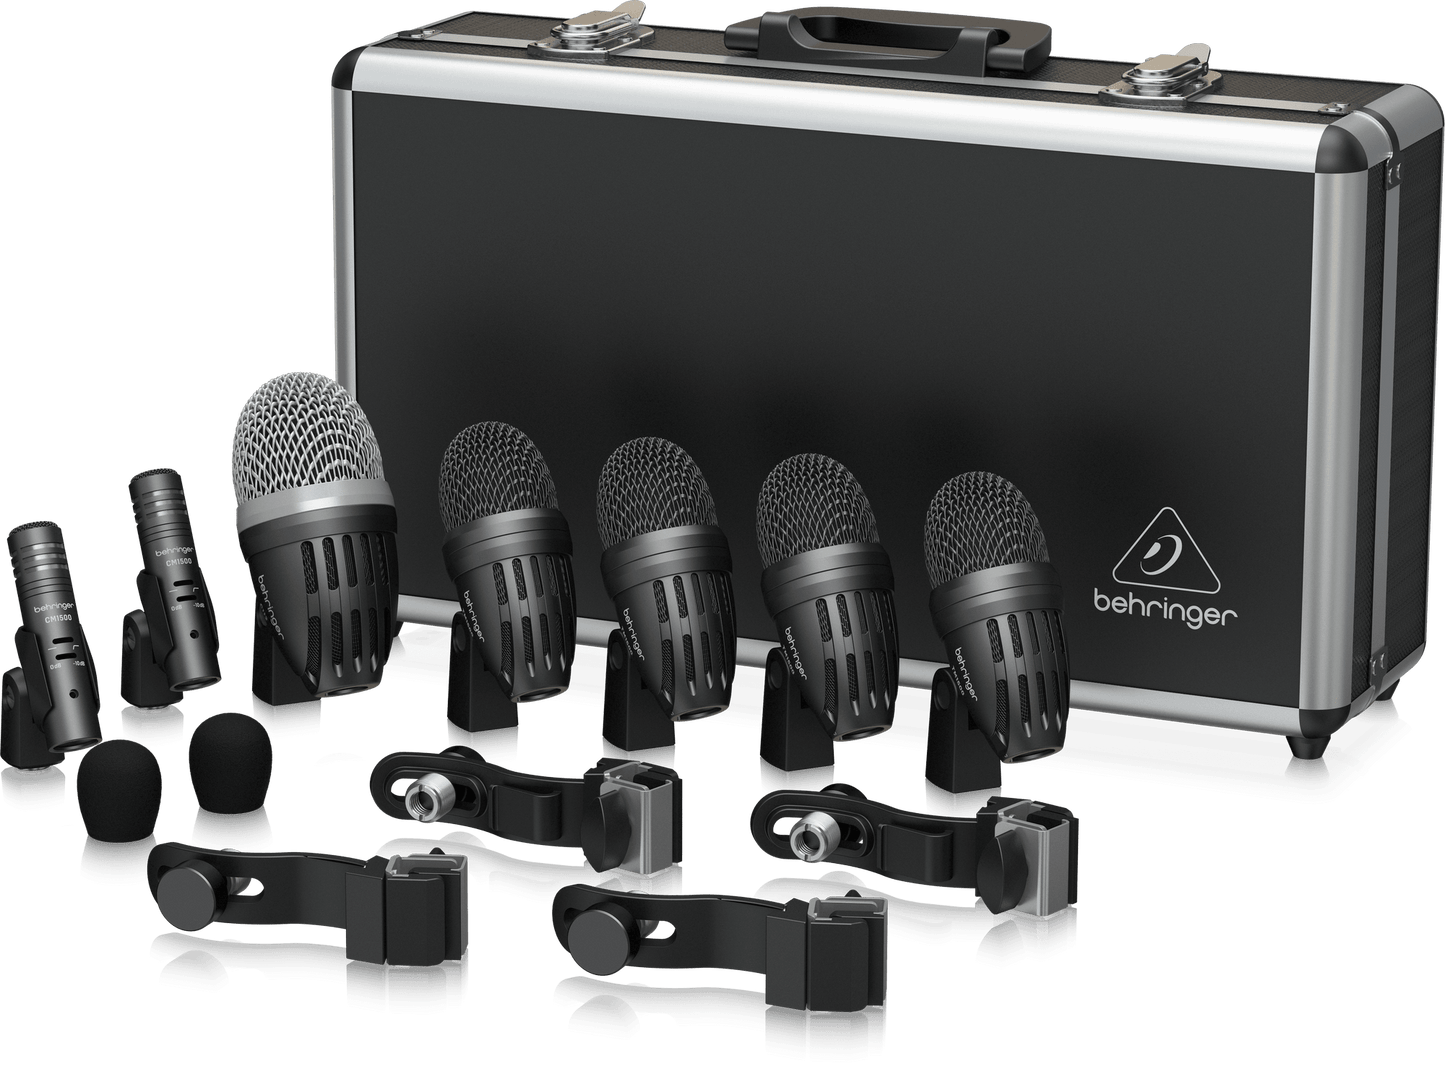 Behringer BC1500 7-Piece Drum Microphone Set for Studio and Live Applications